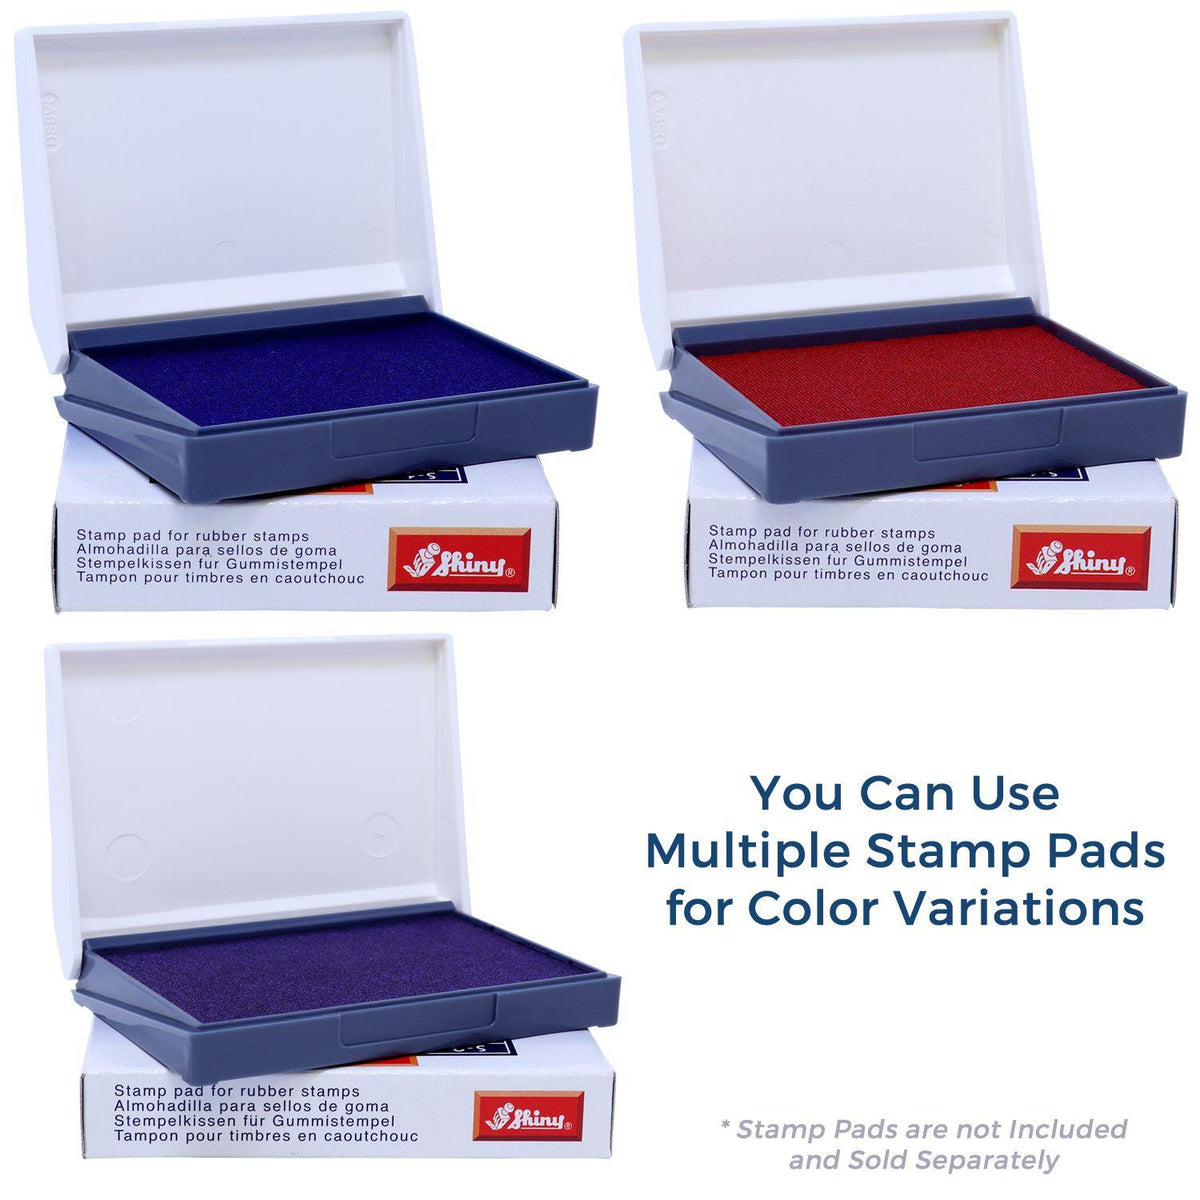 Stamp Pads for Large Forgery Rubber Stamp Available